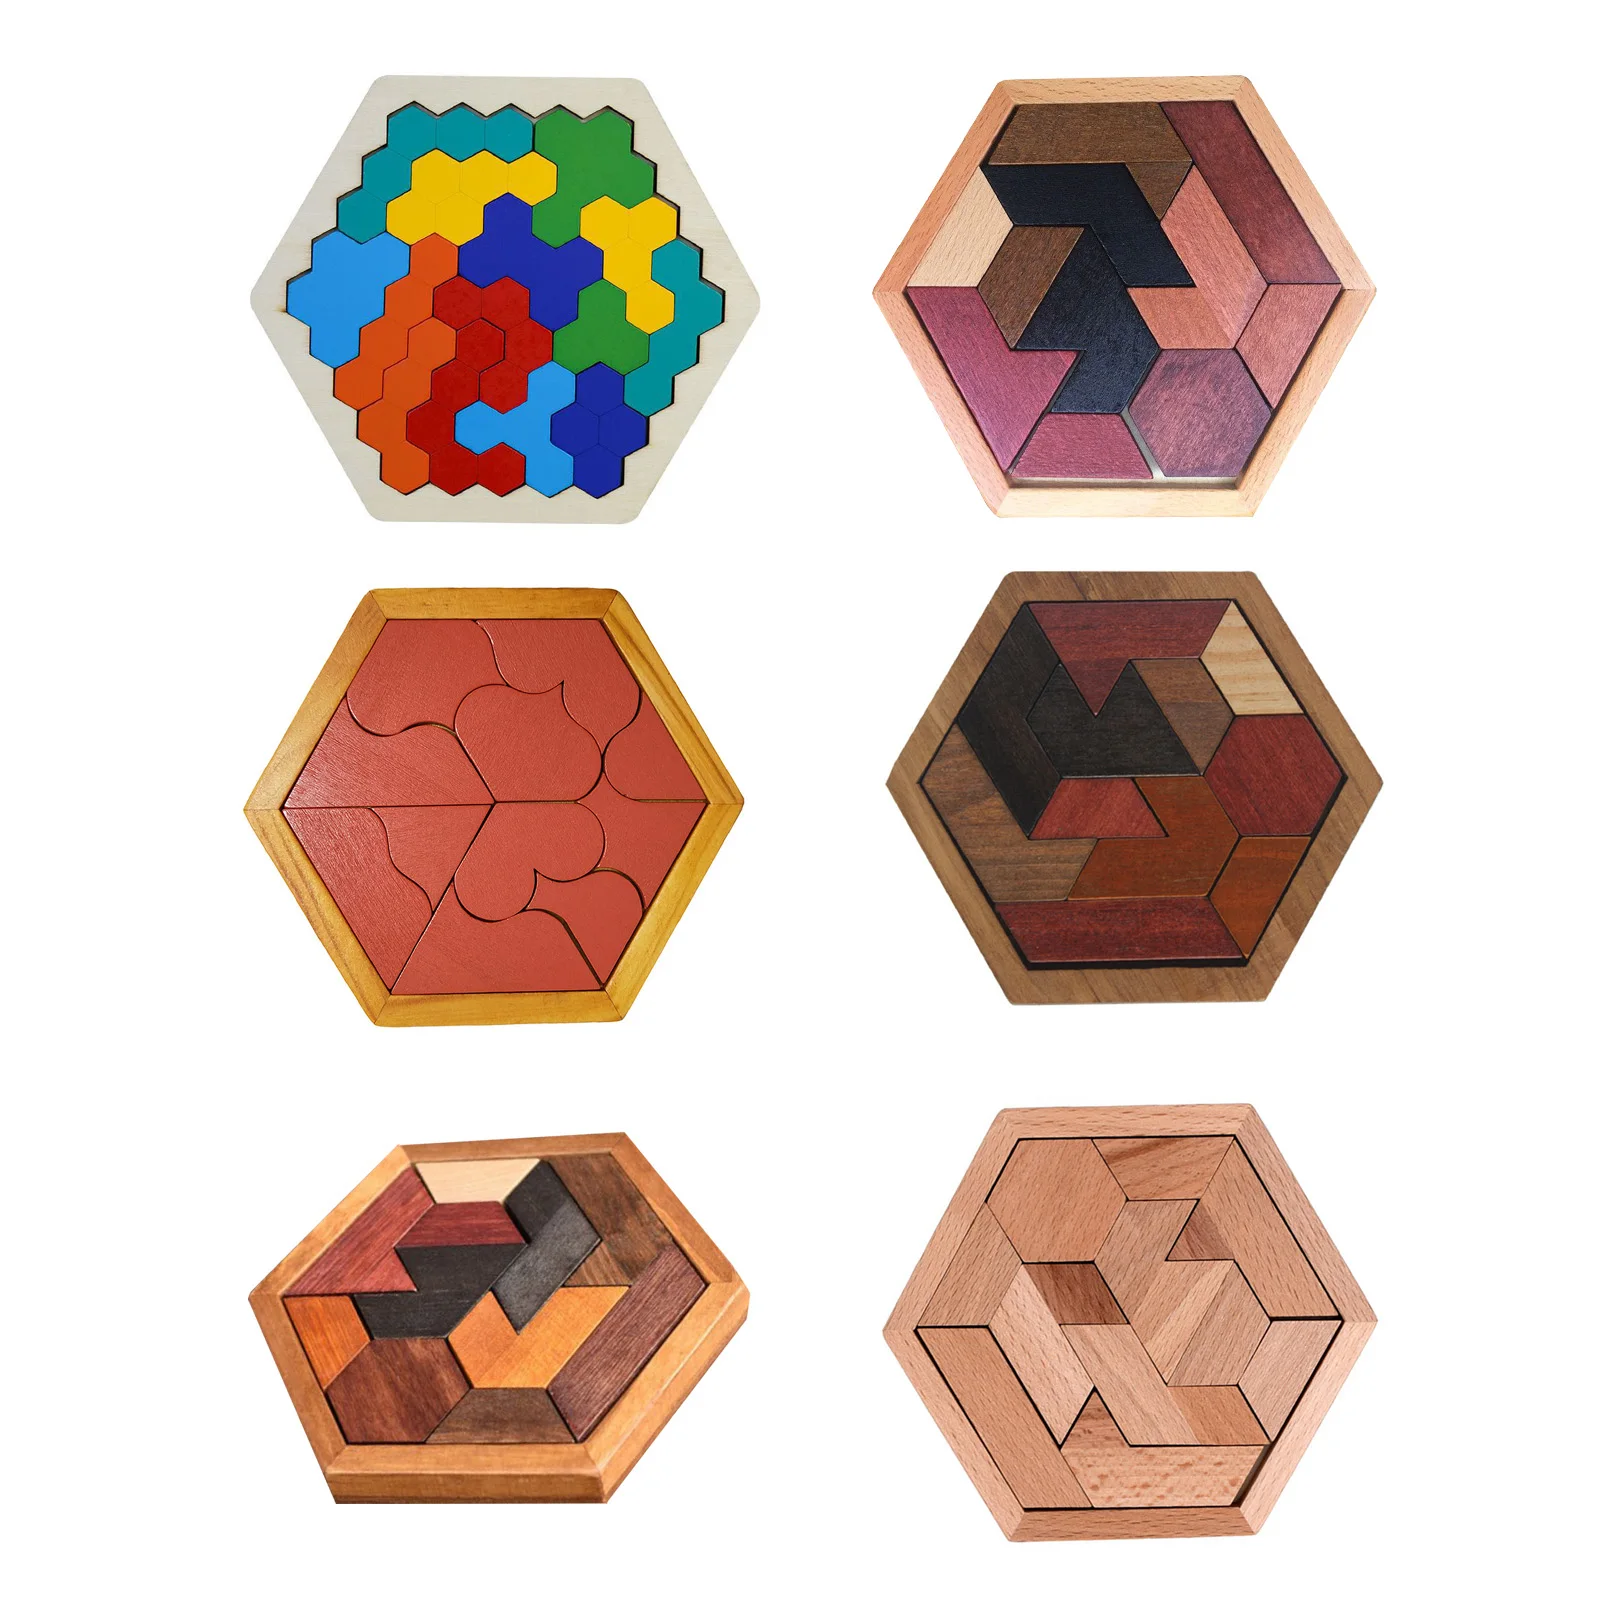 

Wooden Hexagon Tangram Puzzle Brain Teaser Puzzles - Geometry Shape Brain Games For Toddlers Kids Family Portable Puzzles Game